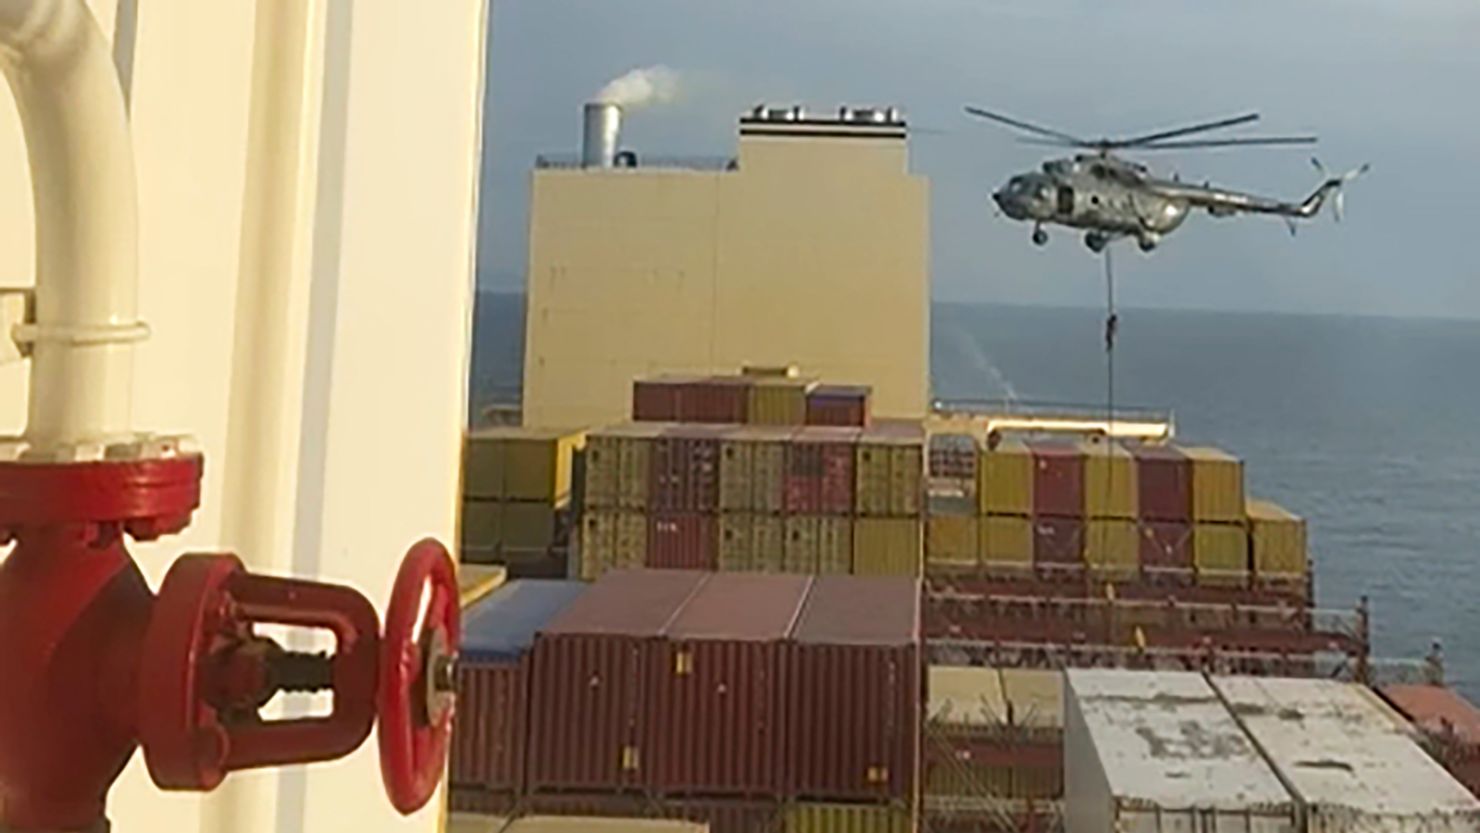 This image made from a video provided to The Associated Press by a Mideast defense official shows a helicopter raid targeting a vessel near the Strait of Hormuz on Saturday, April 13. 